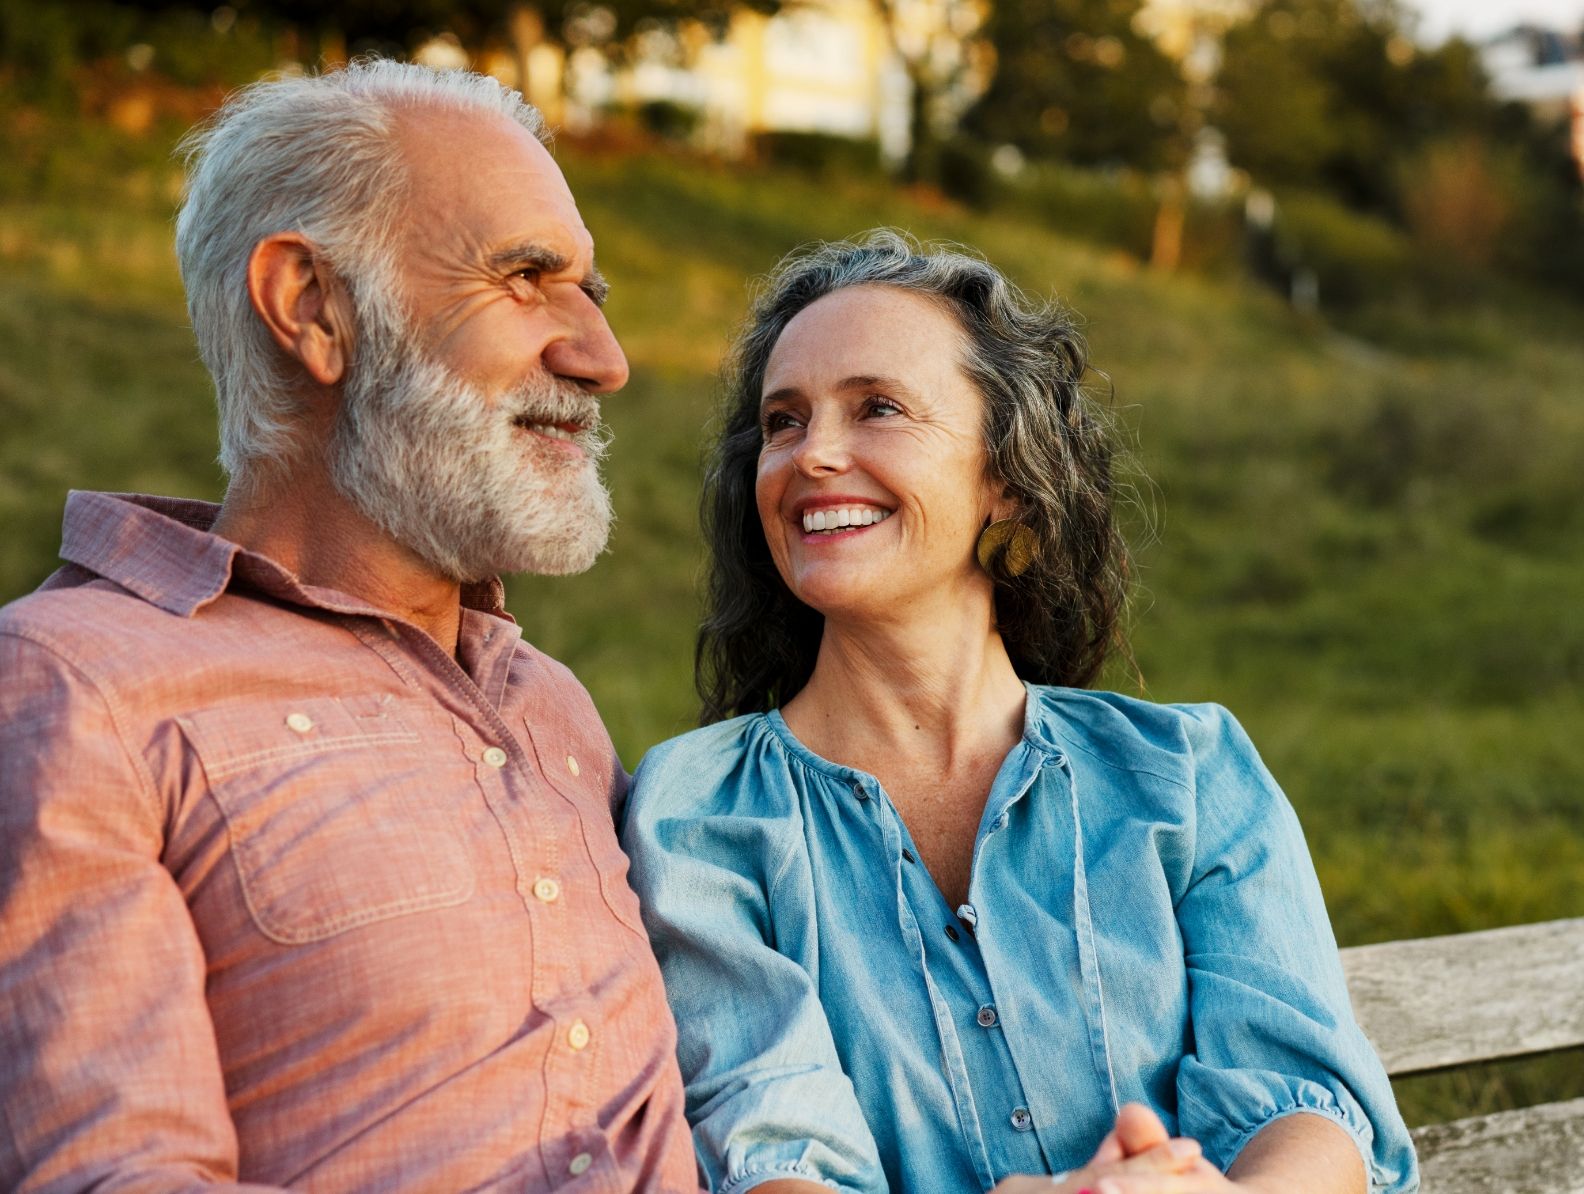 Older Adult couple smiles on park bench